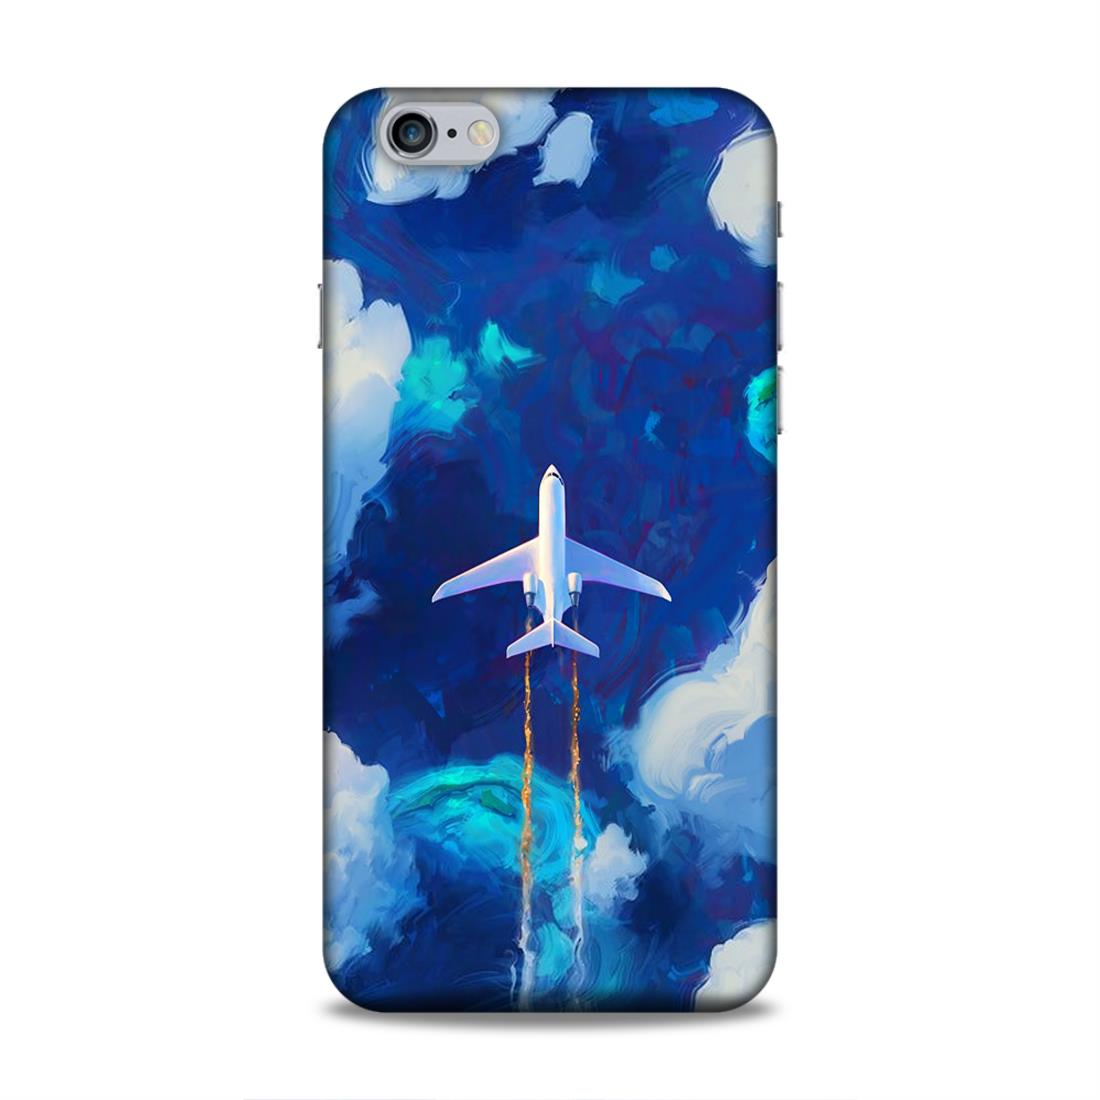 Aeroplane In The Sky Hard Back Case For Apple iPhone 6 Plus / 6s Plus